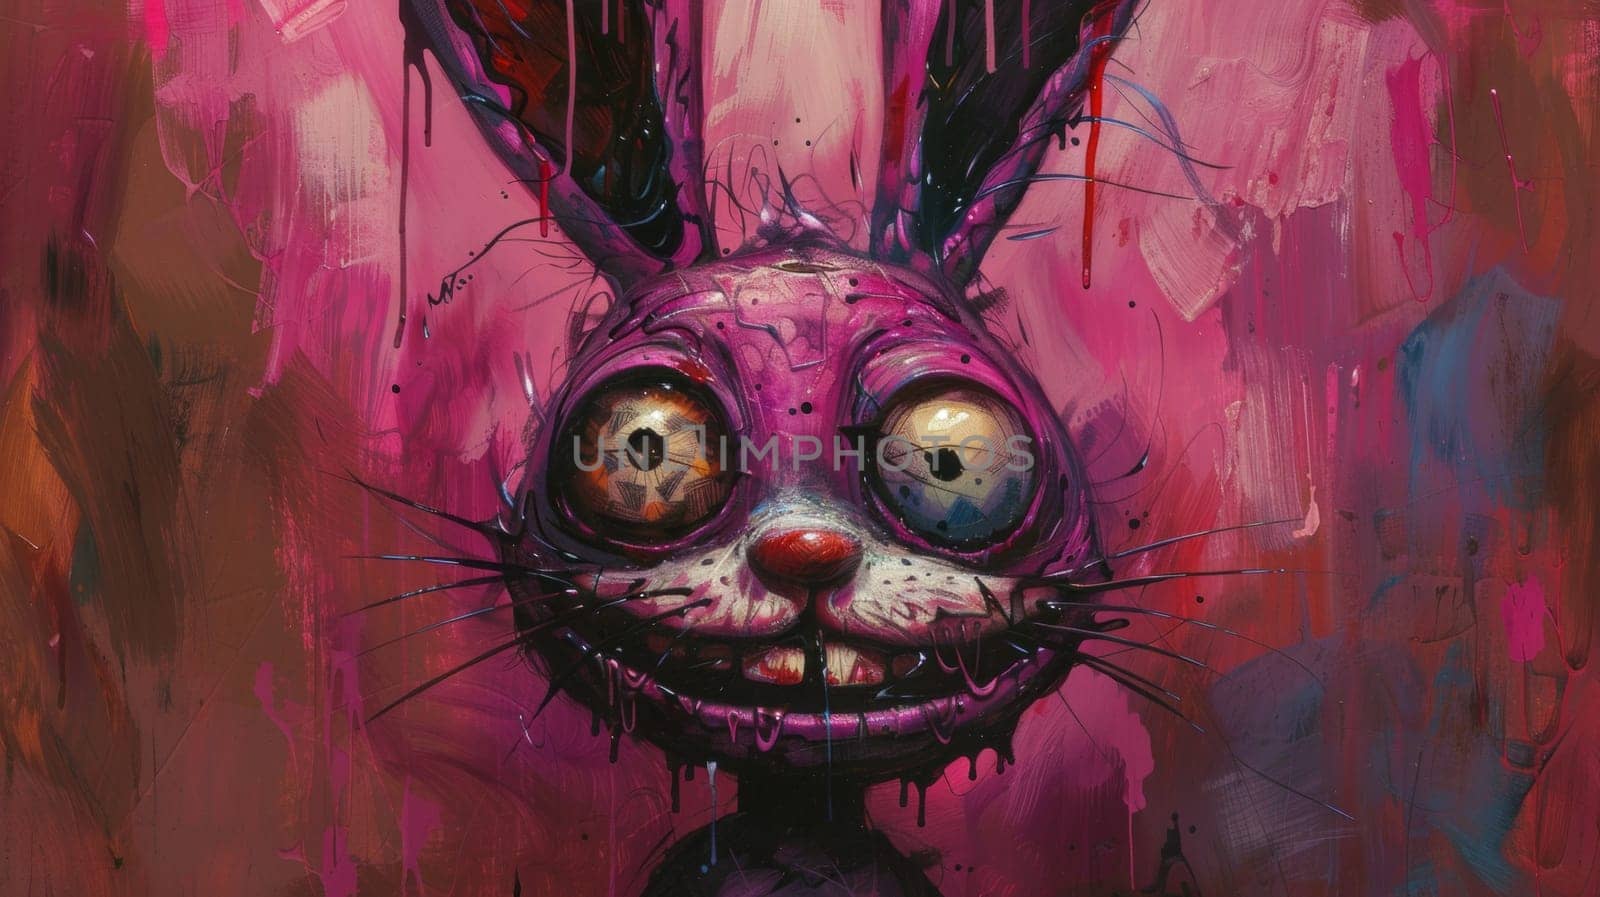 A painting of a rabbit with big eyes and painted on